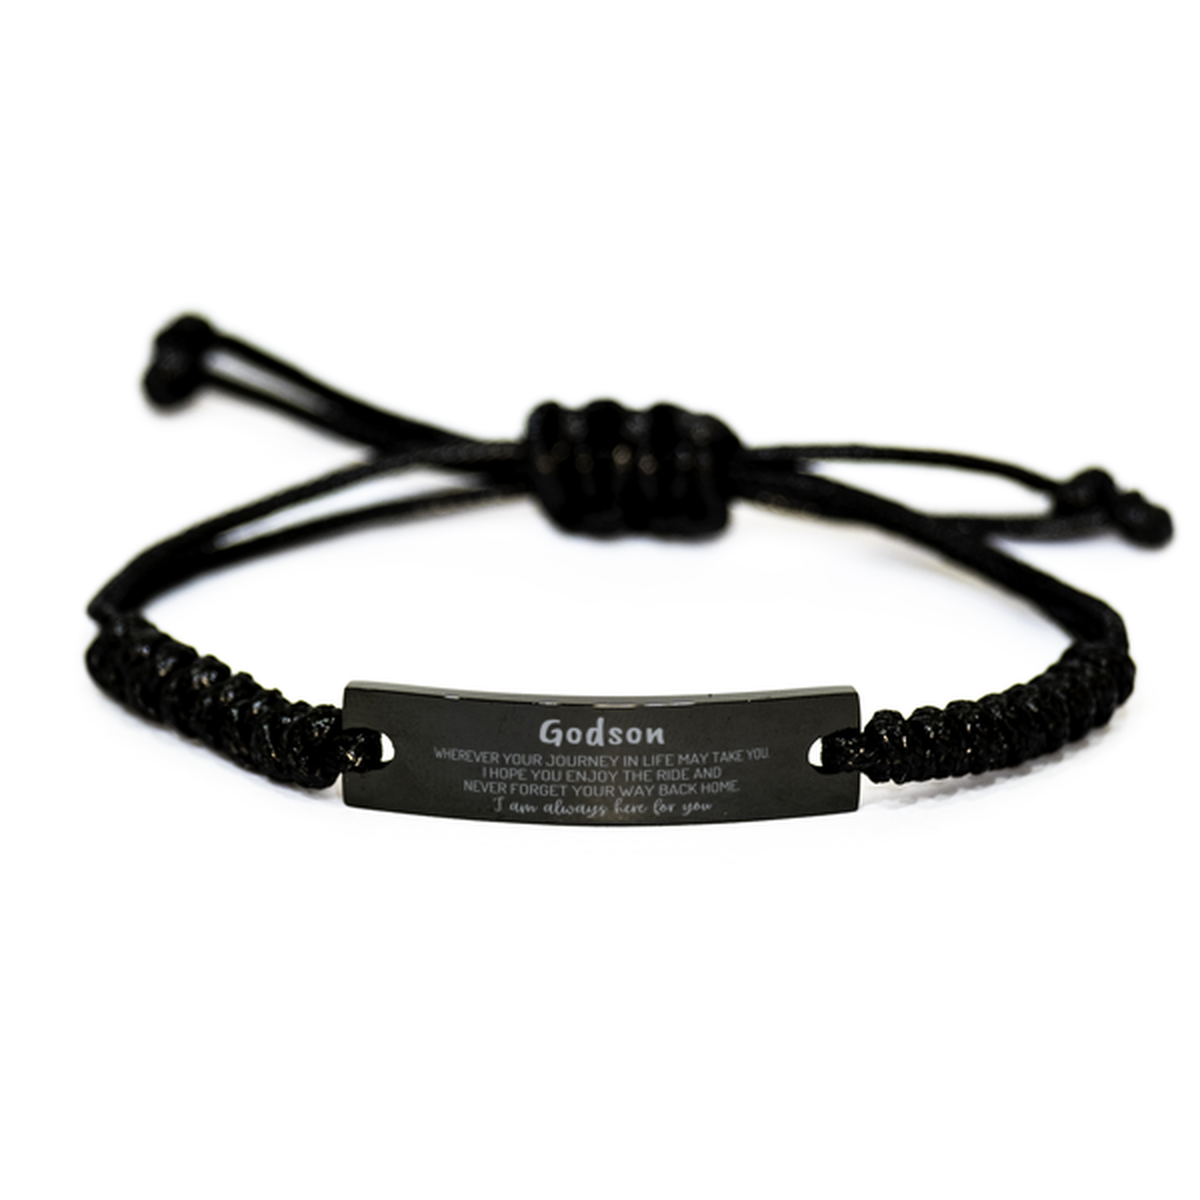 Godson wherever your journey in life may take you, I am always here for you Godson Black Rope Bracelet, Awesome Christmas Gifts For Godson, Godson Birthday Gifts for Men Women Family Loved One